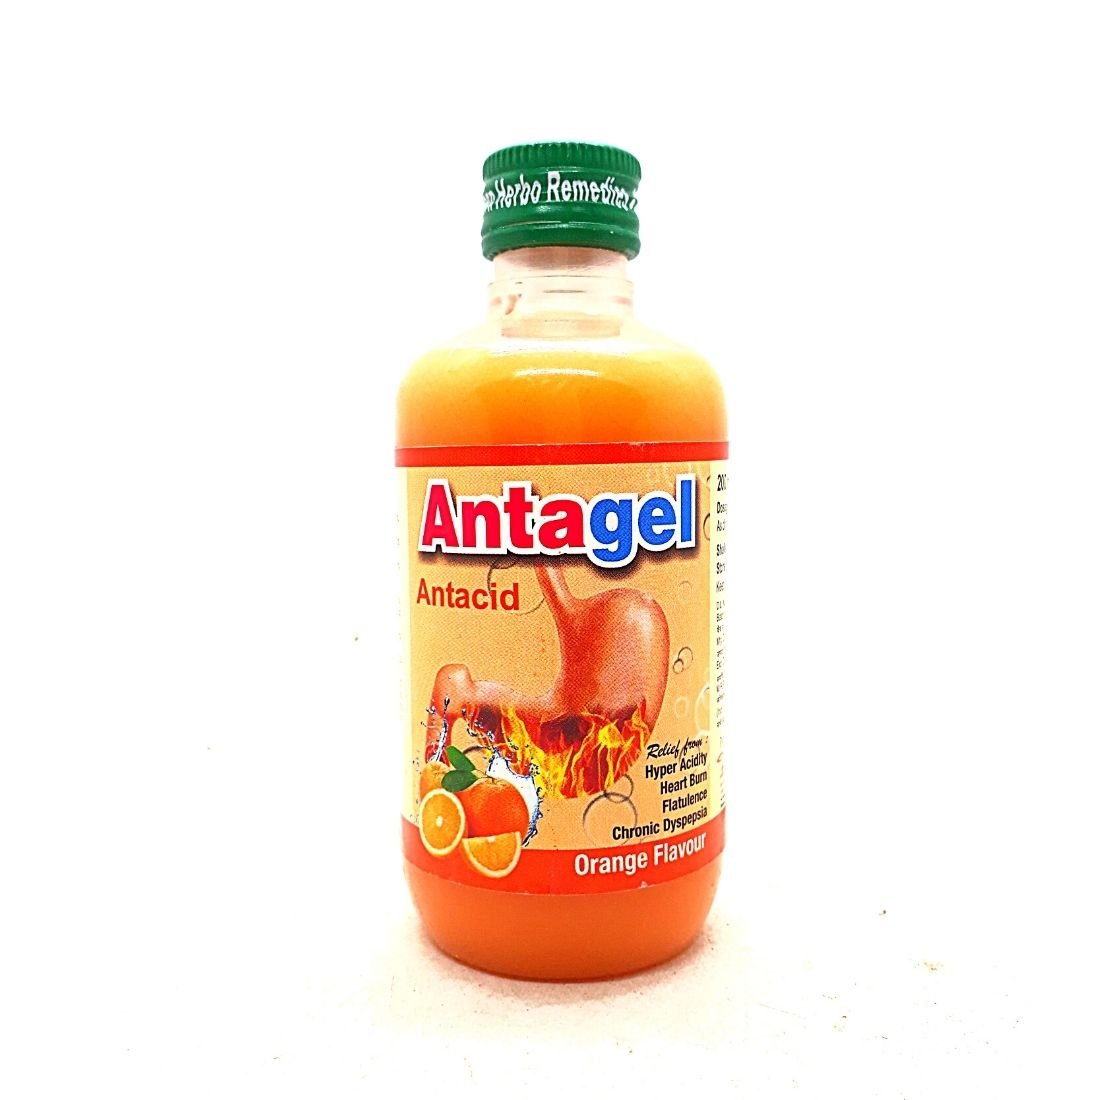 ANTAGEL Antacid Tonic is used for symptoms of excessive stomach acid such as stomach upset, heartburn and acid indigestion.